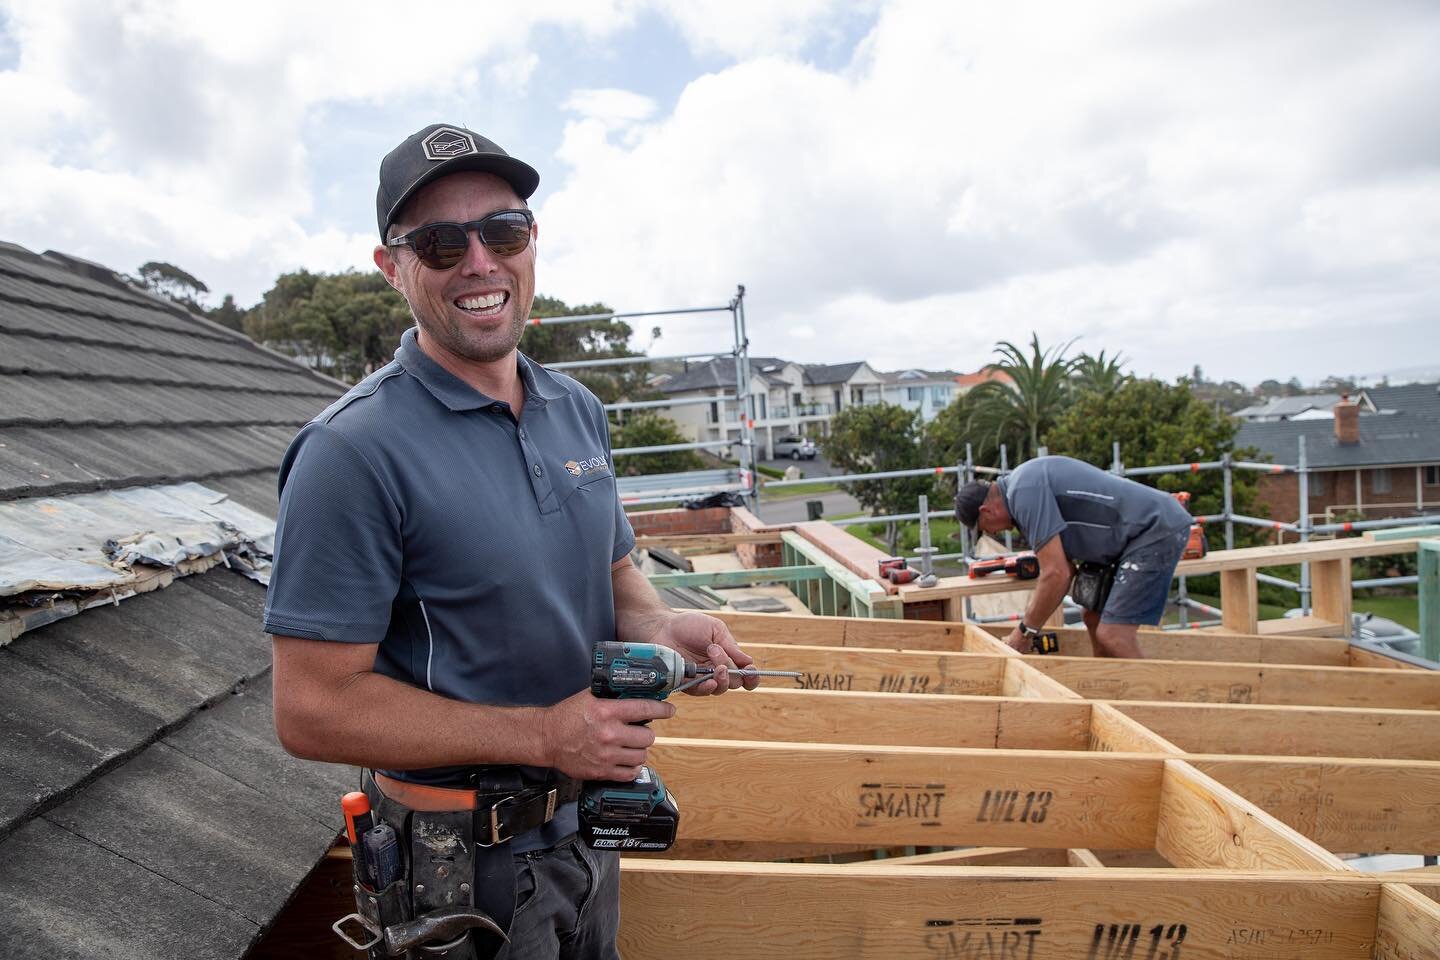 Our Director, Luke Shearer is a passionate and highly skilled Carpenter by Trade. This means he is on site, tool belt on, helping to build your home every step of the way! Luke is a perfectionist and works closely throughout all components of the con